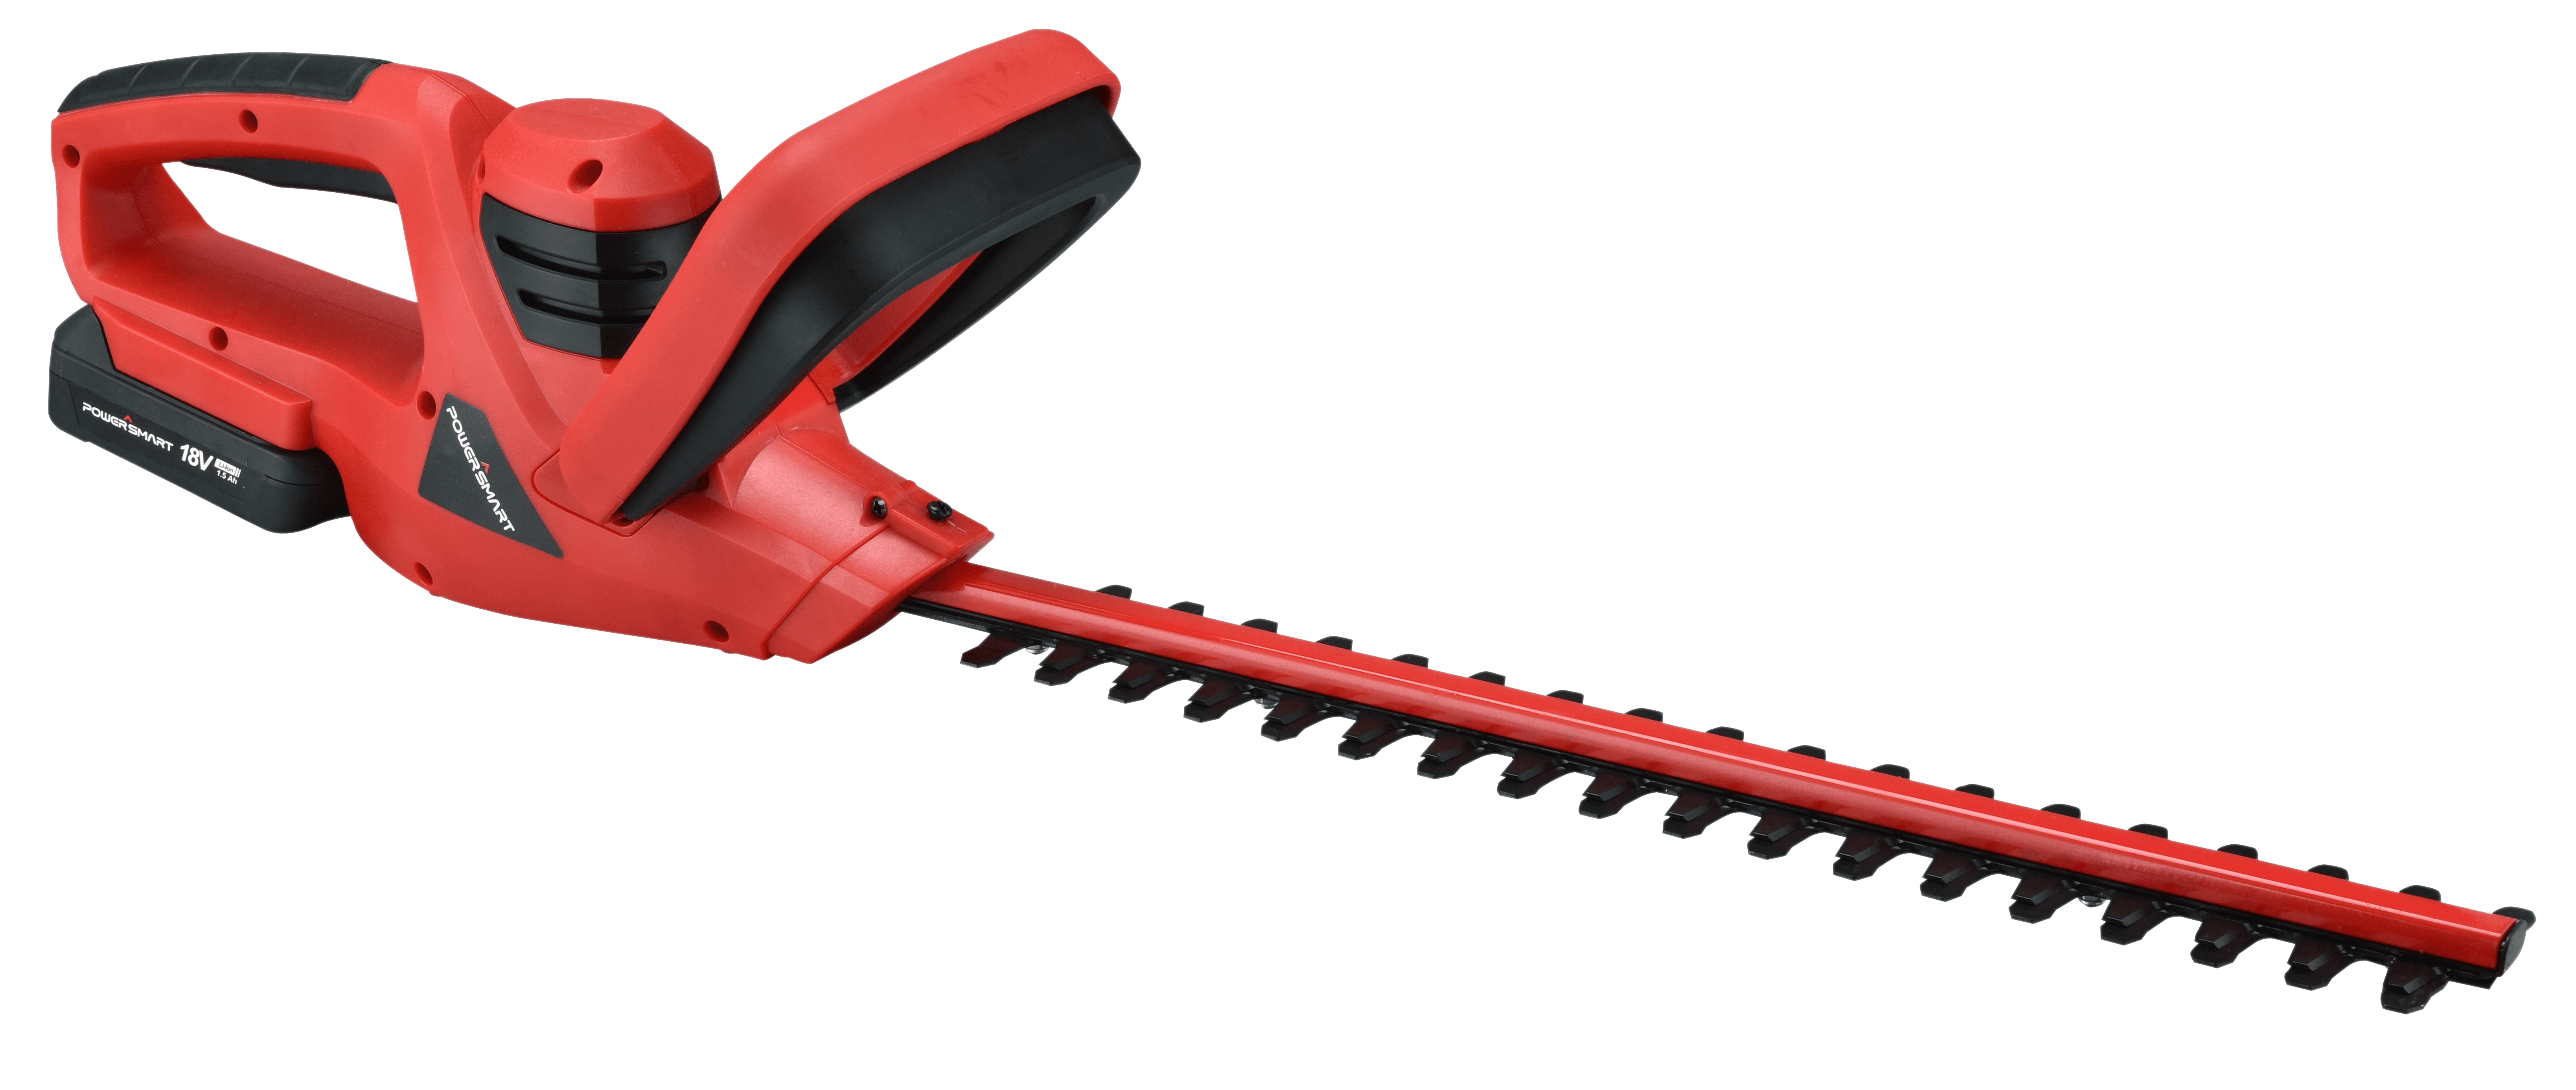 Cordless Hedge Trimmer with 40 Volt Battery 58 cm cutting length 2,5 AH & Charger 